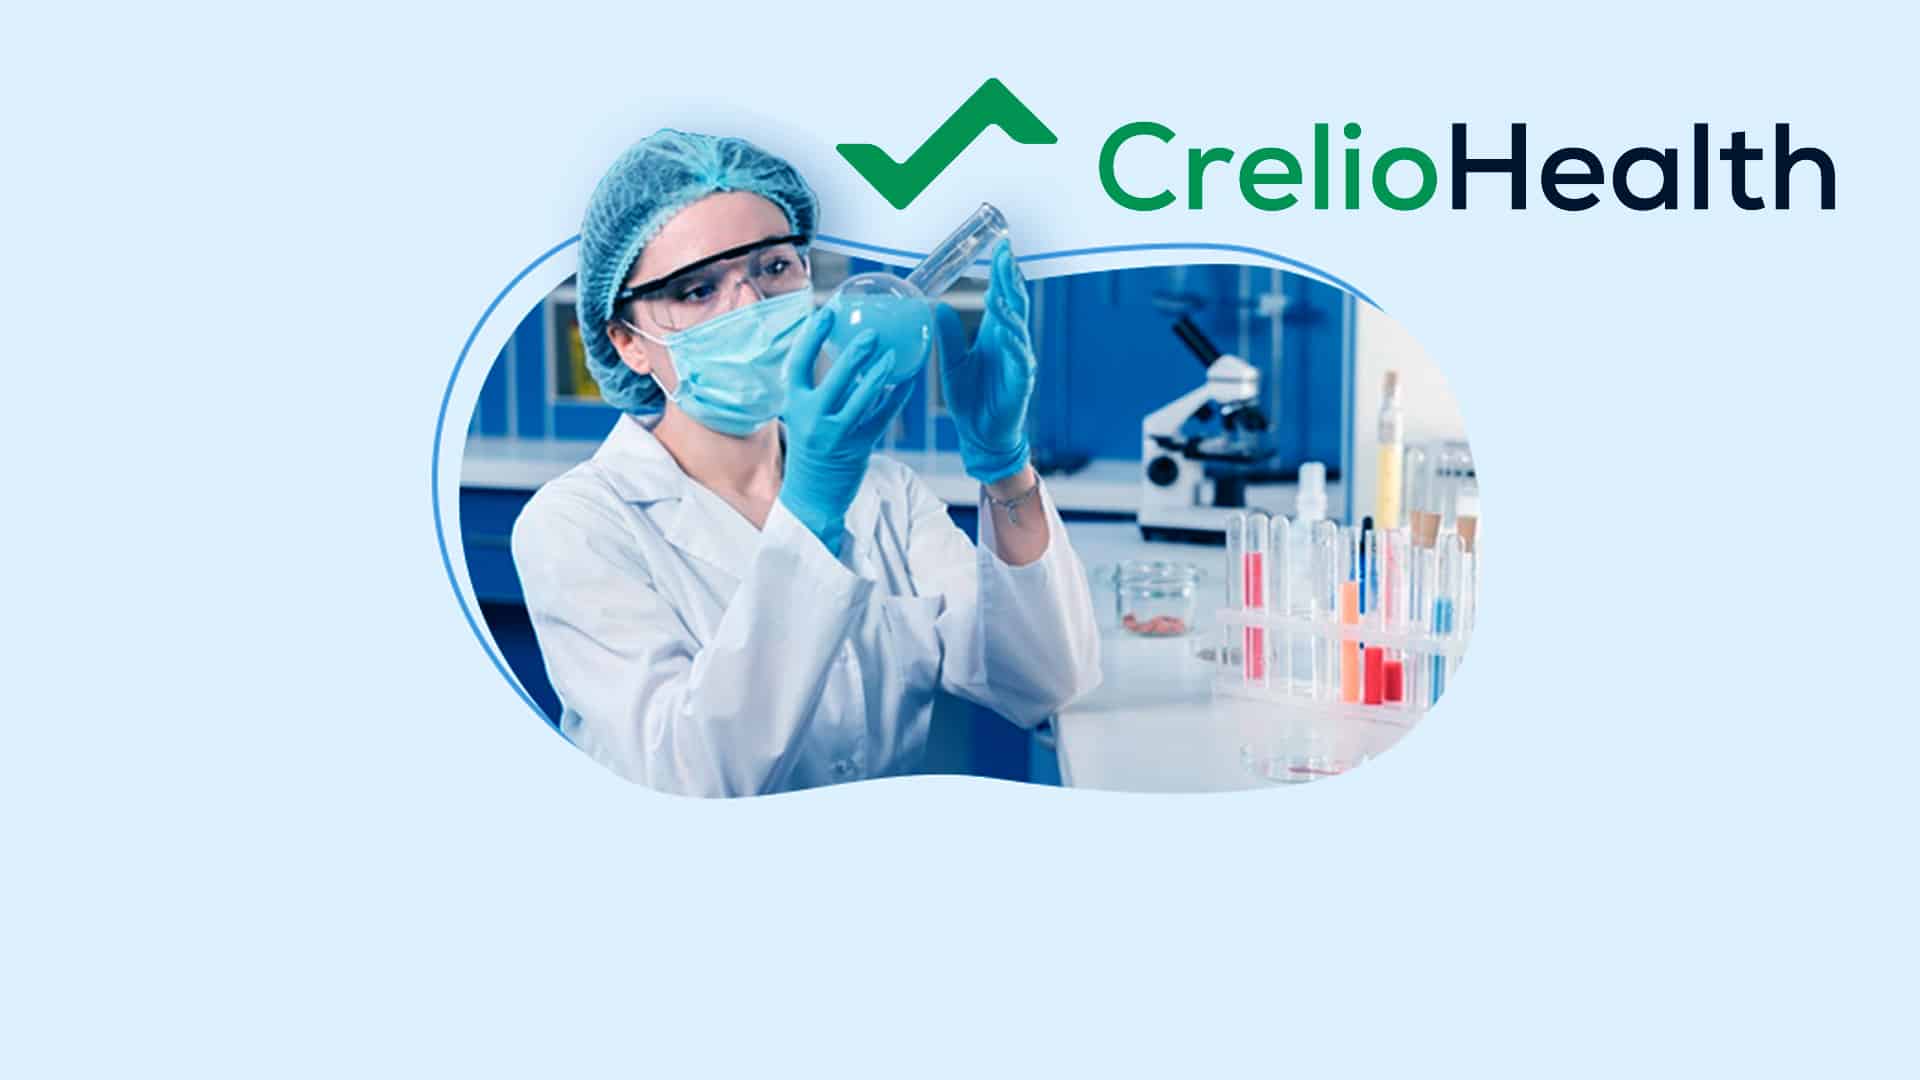 Covid Crisis- How CrelioHealth helped diagnostic labs ramp up testing and report delivery